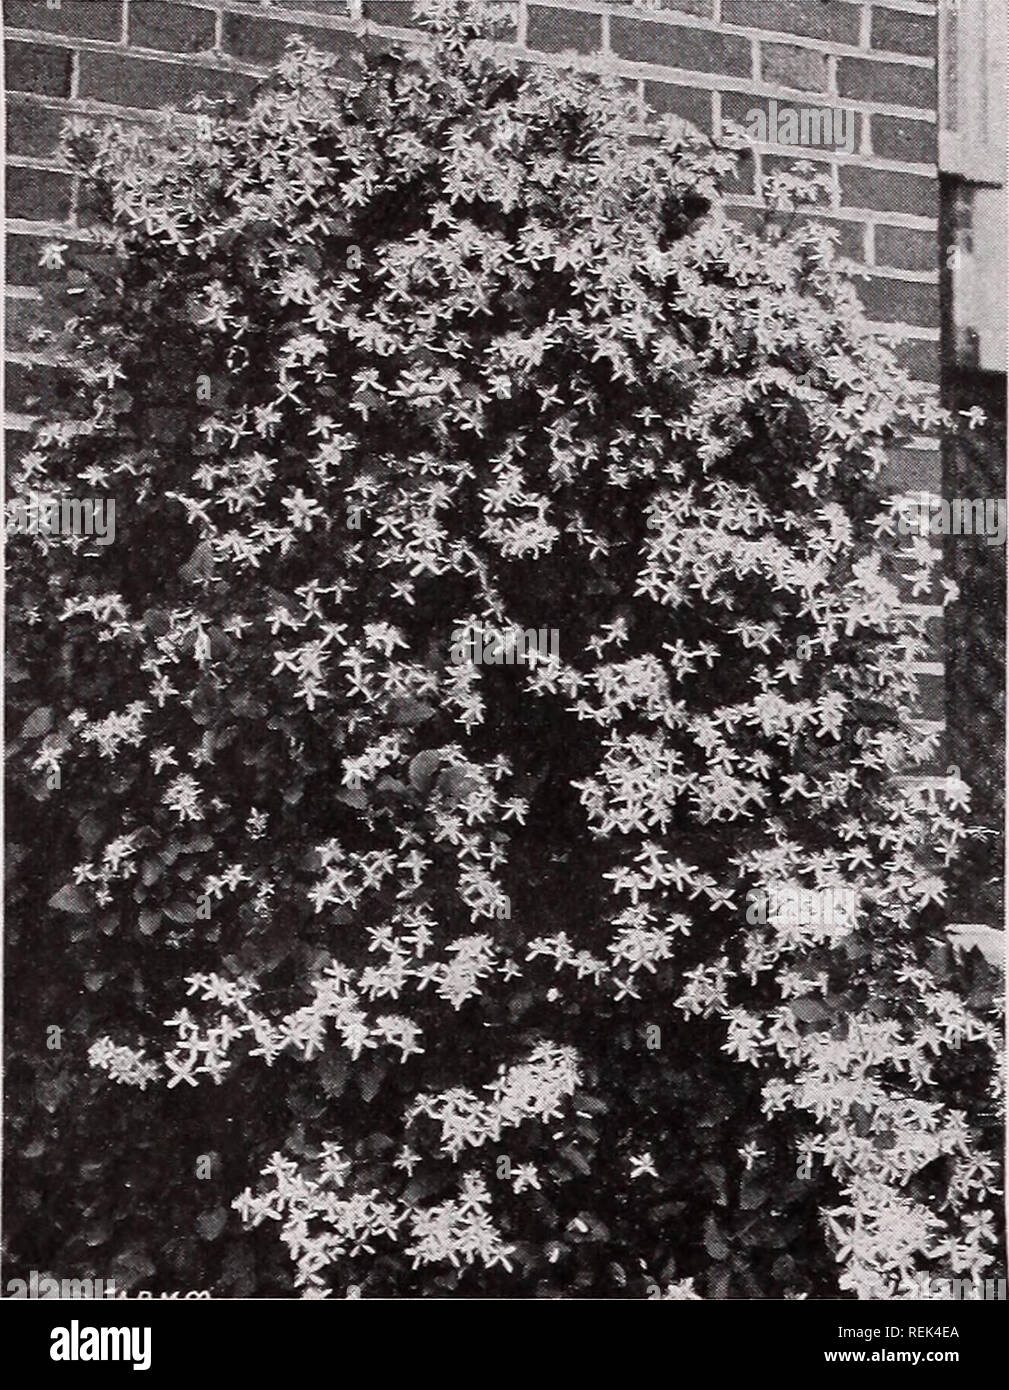 . C. M. Hobbs &amp; Sons. Nurseries Horticulture Catalogs; Evergreens Catalogs; Fruit trees Catalogs; Climbing plants Catalogs; Shrubs Catalogs; Flowers Catalogs; Vegetables Catalogs. 48 C. M. HOBBS &amp; SONS, BRIDGEPORT, INDIANA. Clematis Paniculata. BIGNONIA - Tecoma Trumpet Creeper (B. Radicans)—A hardy climbing plant with large trumpet- shaped scarlet flowers appearing in August. Flourishes everywhere under the most unfavorable conditions, and is always pretty and satisfactory. Large Flowered Trumpet Creeper (B. Radicans, var. Grandiflora)—A beauti- ful variety with very large flowers, sa Stock Photo